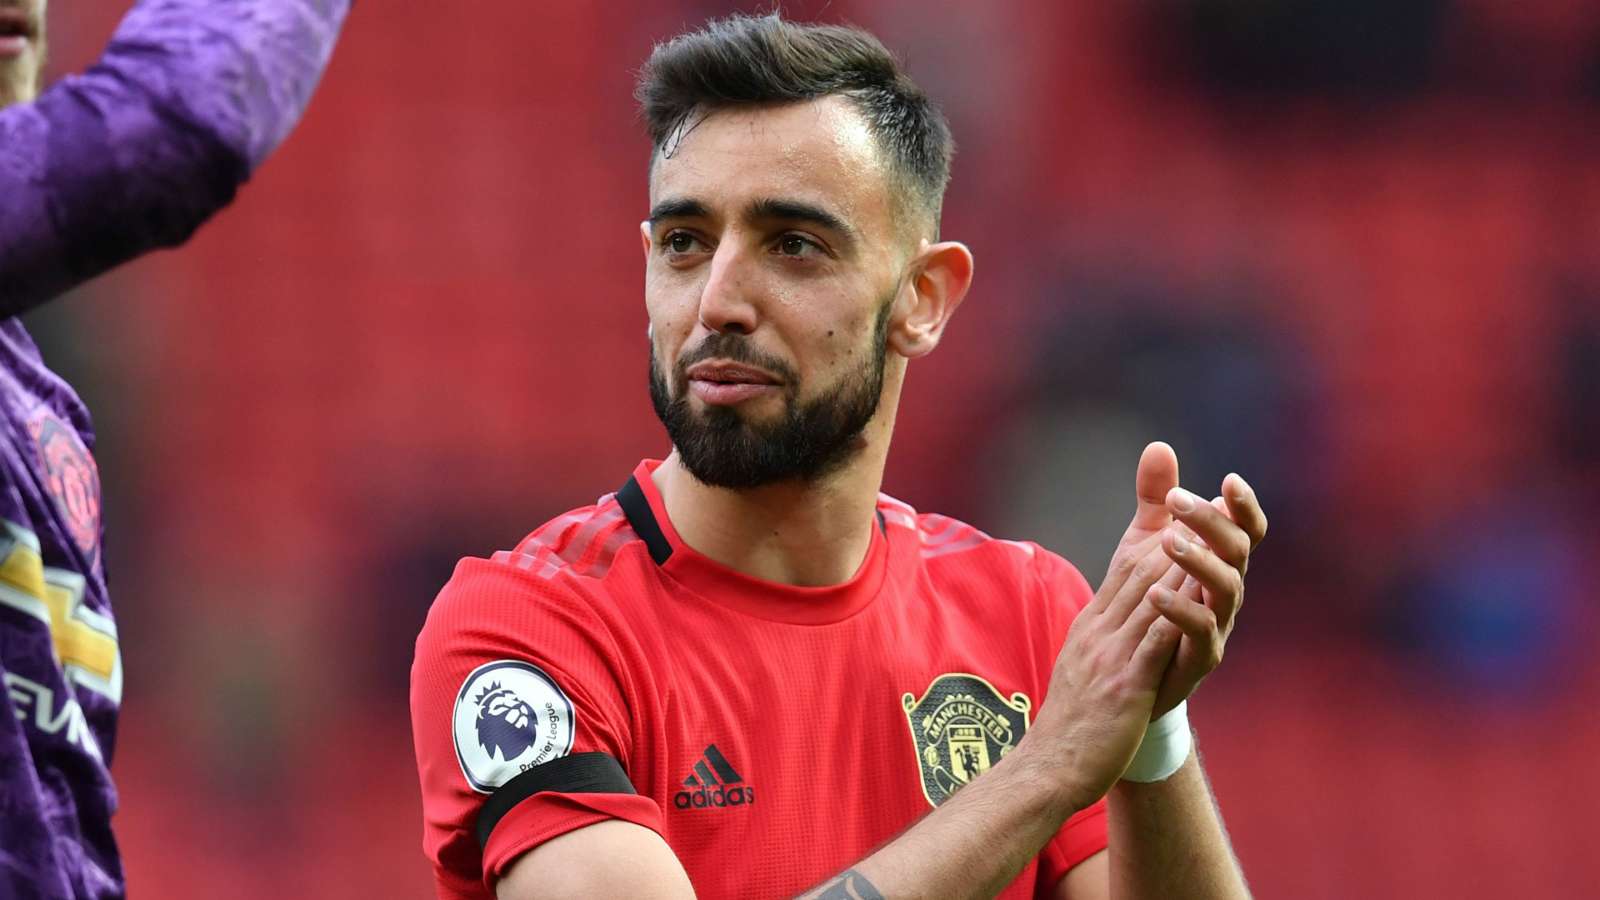 Fernandes signing shows Man Utd are moving in right direction, says Woodward - Bóng Đá